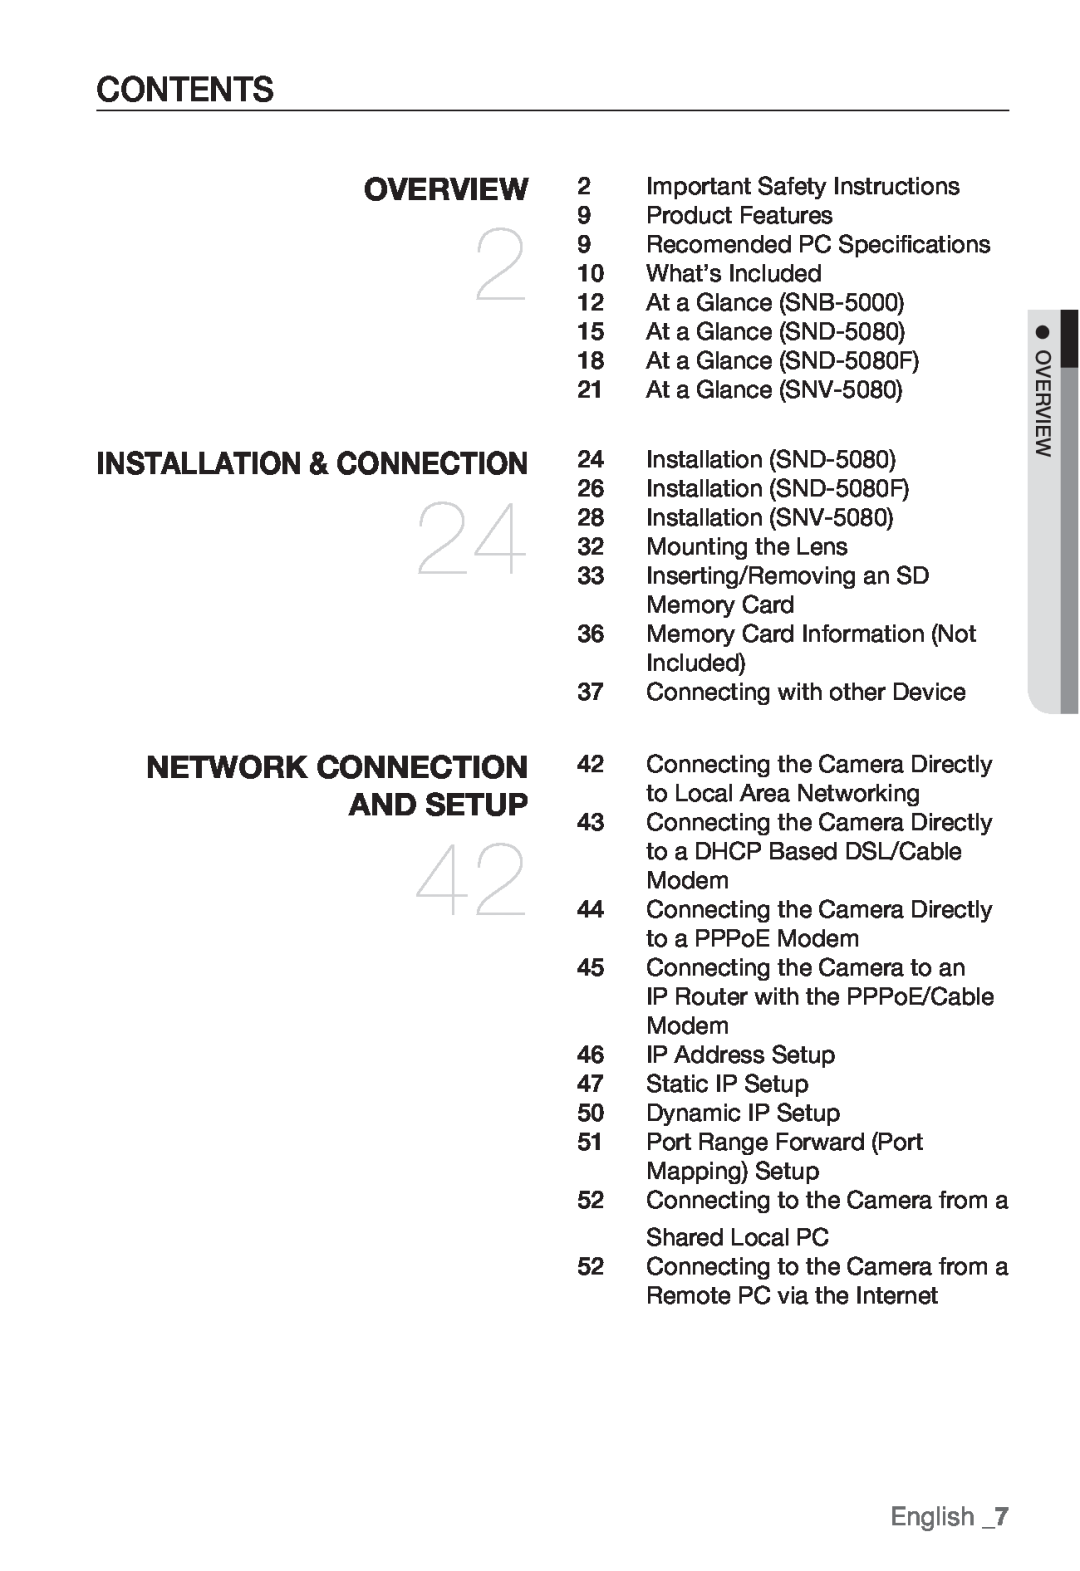 Samsung SNB-5000, SNV-5080, SND-5080 Contents, Overview, Network Connection, And Setup, Installation & Connection, English 